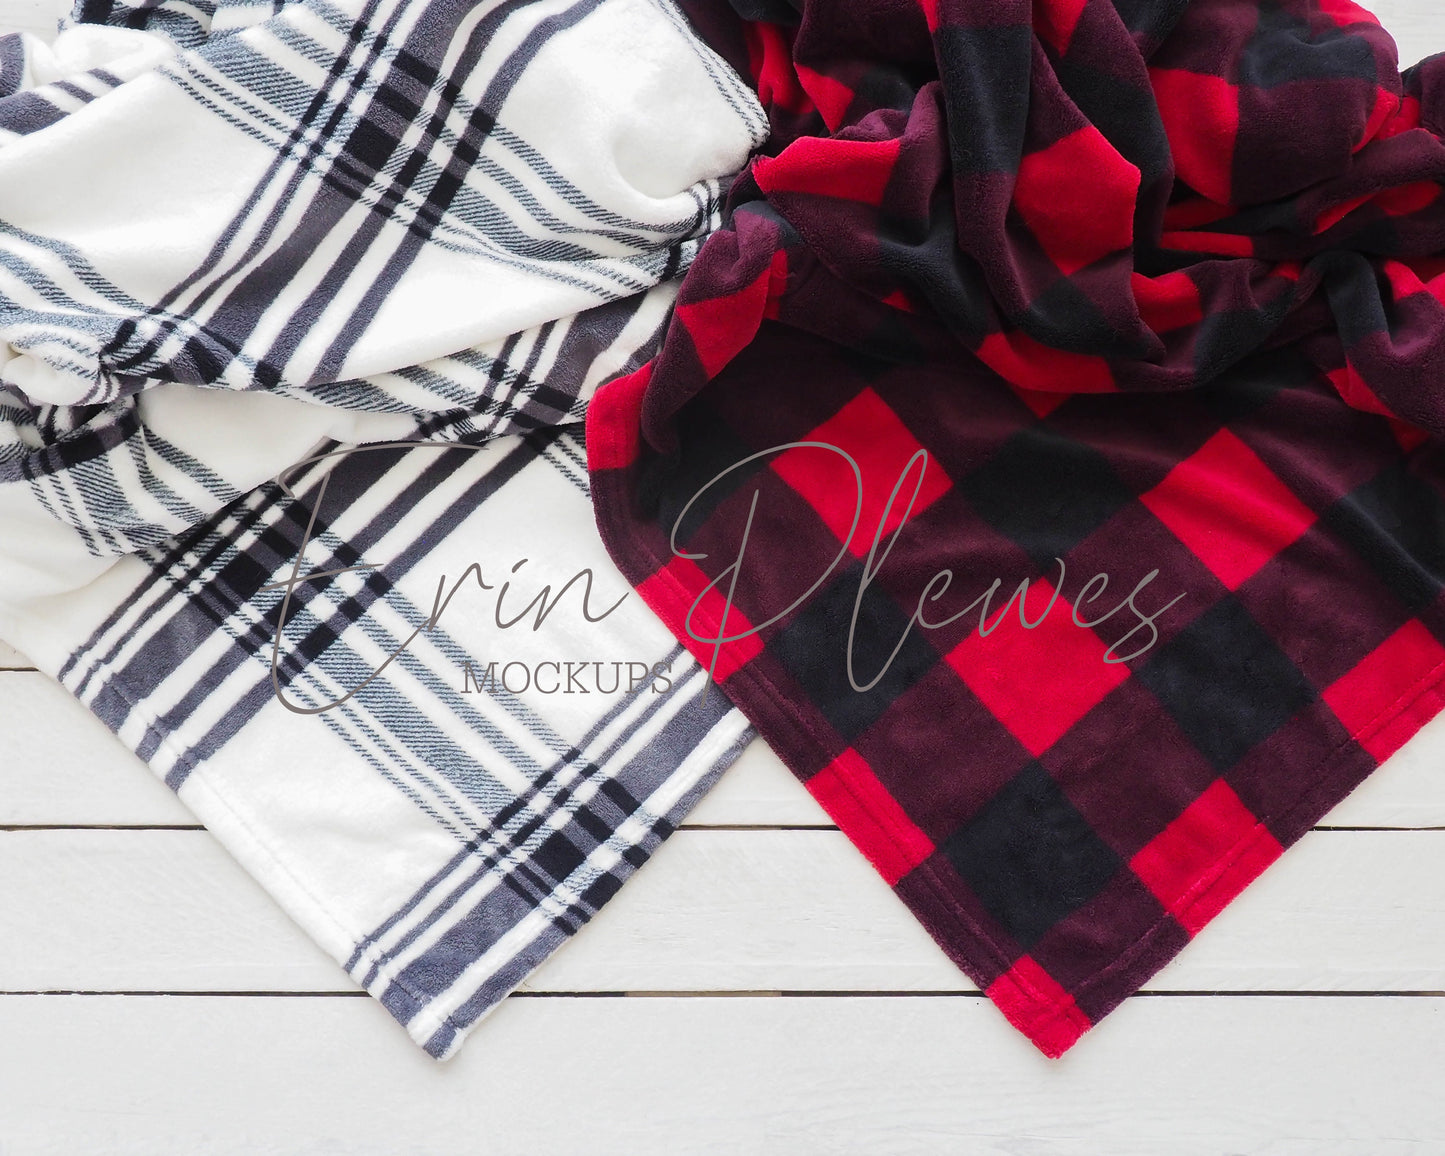 Plaid Blanket Mockup, Red and White Plaid Blanket Mock up, 2 Fleece Blanket Mock Up, Lifestyle Stock Photo, Instant Download Jpeg